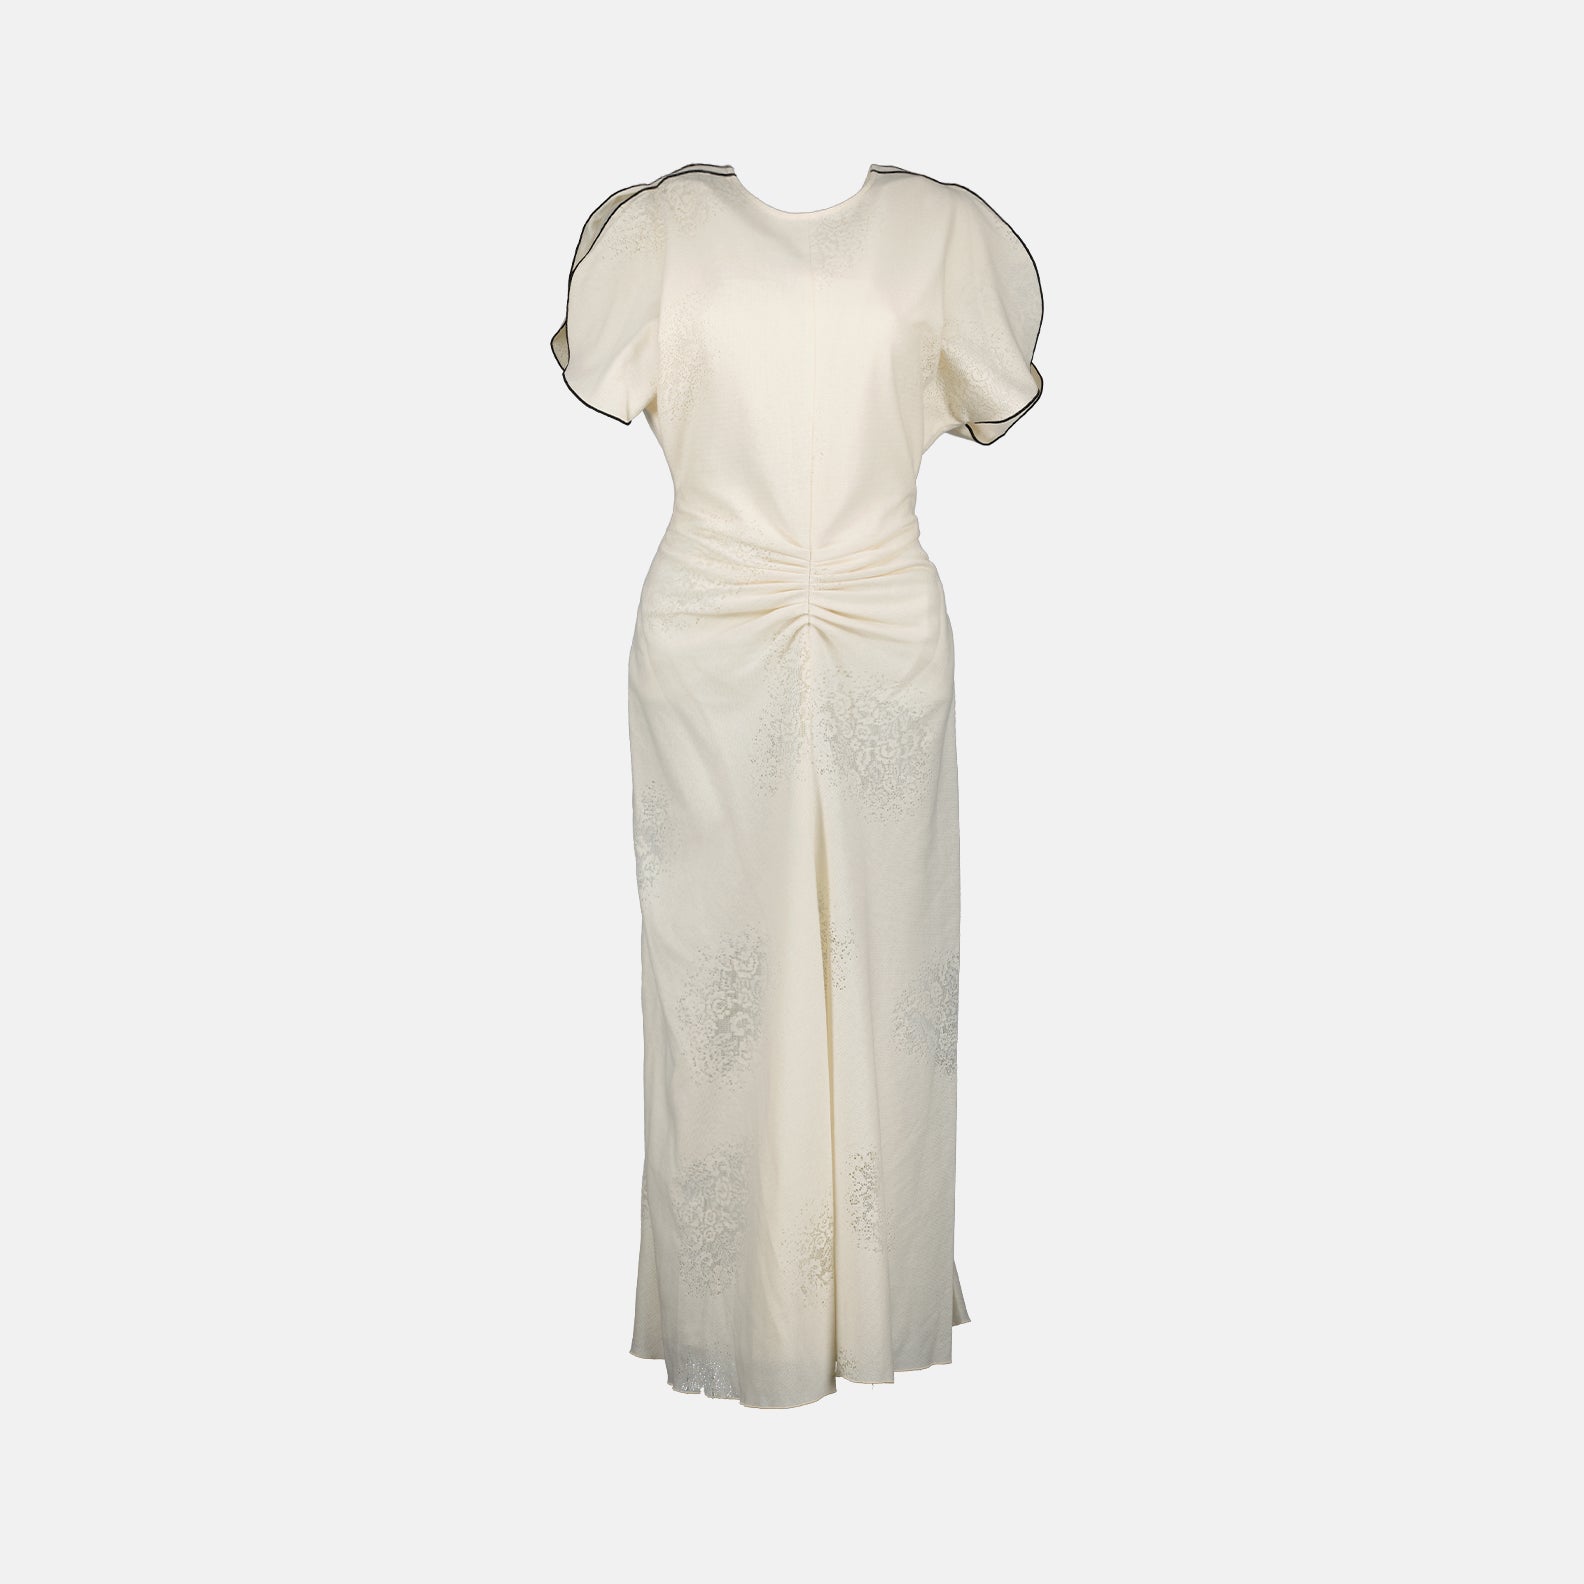 Ruched mid-length dress